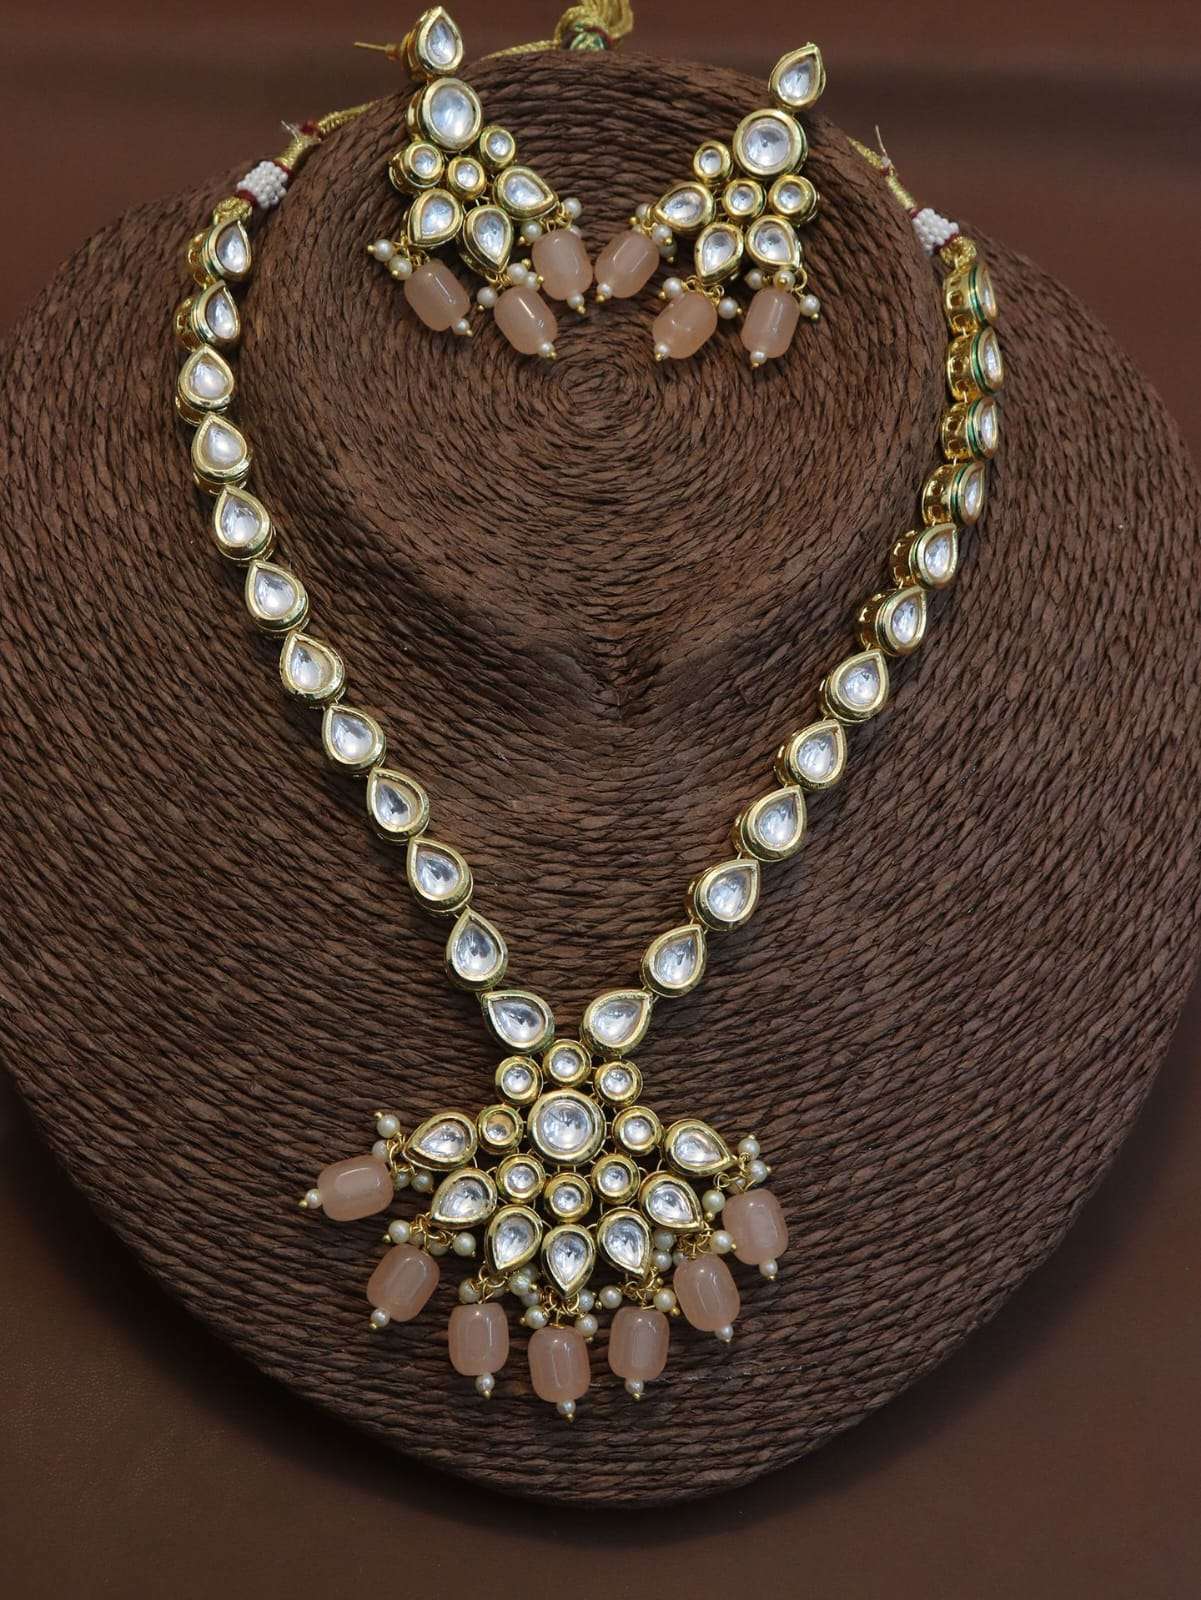 S-696 BY FASHID WHOLESALE 01 TO 07 SERIES TRADITIONAL ARTIFICIAL JEWELLERY FOR INDIAN ATTIRE AT EXCLUSIVE RANGE.